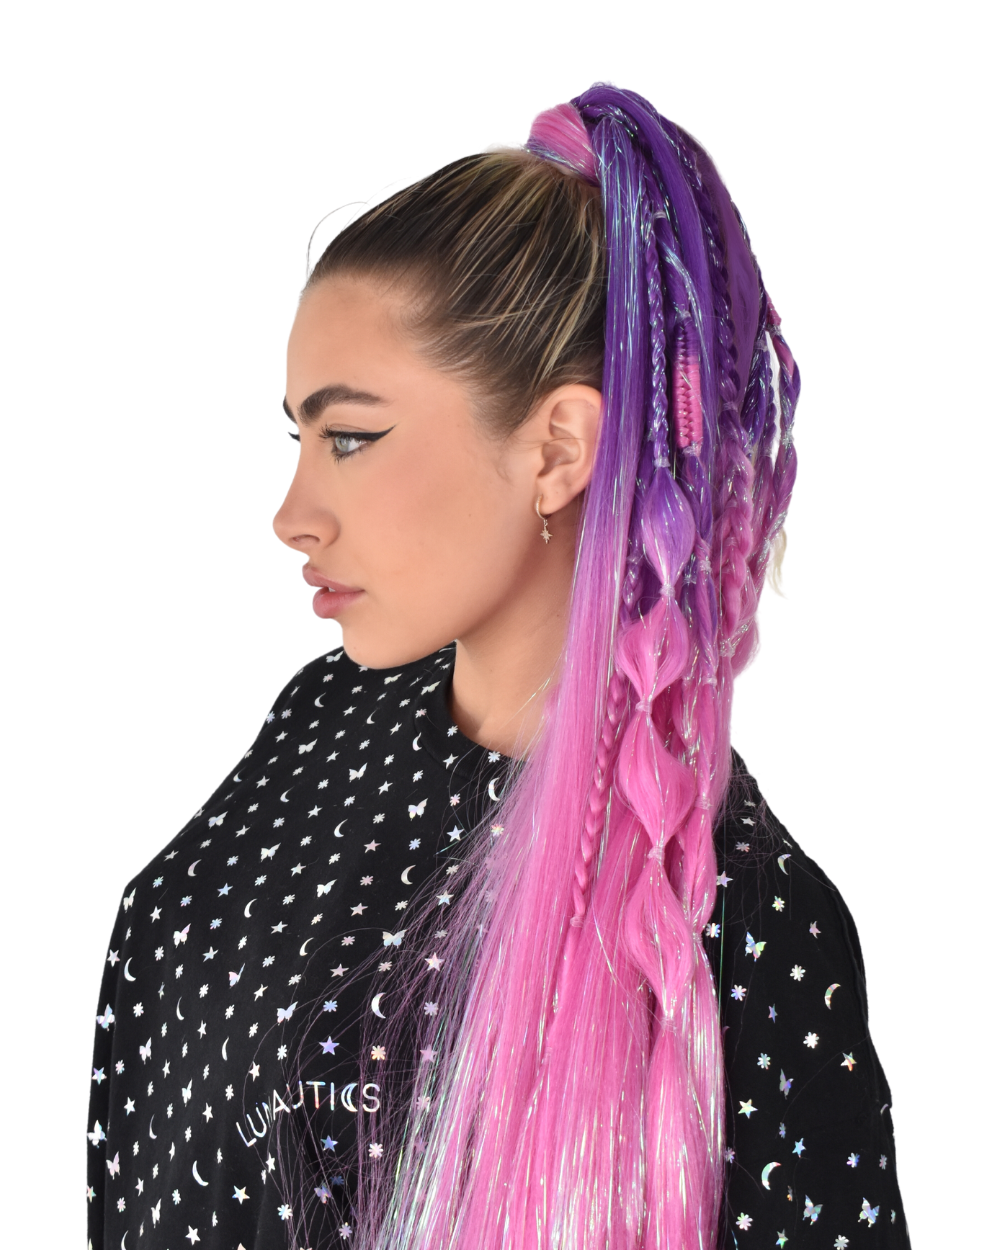 Infinity - Purple Ombré Braided Ponytail Extension with Tinsel - Lunautics Ponytail Hair Extension